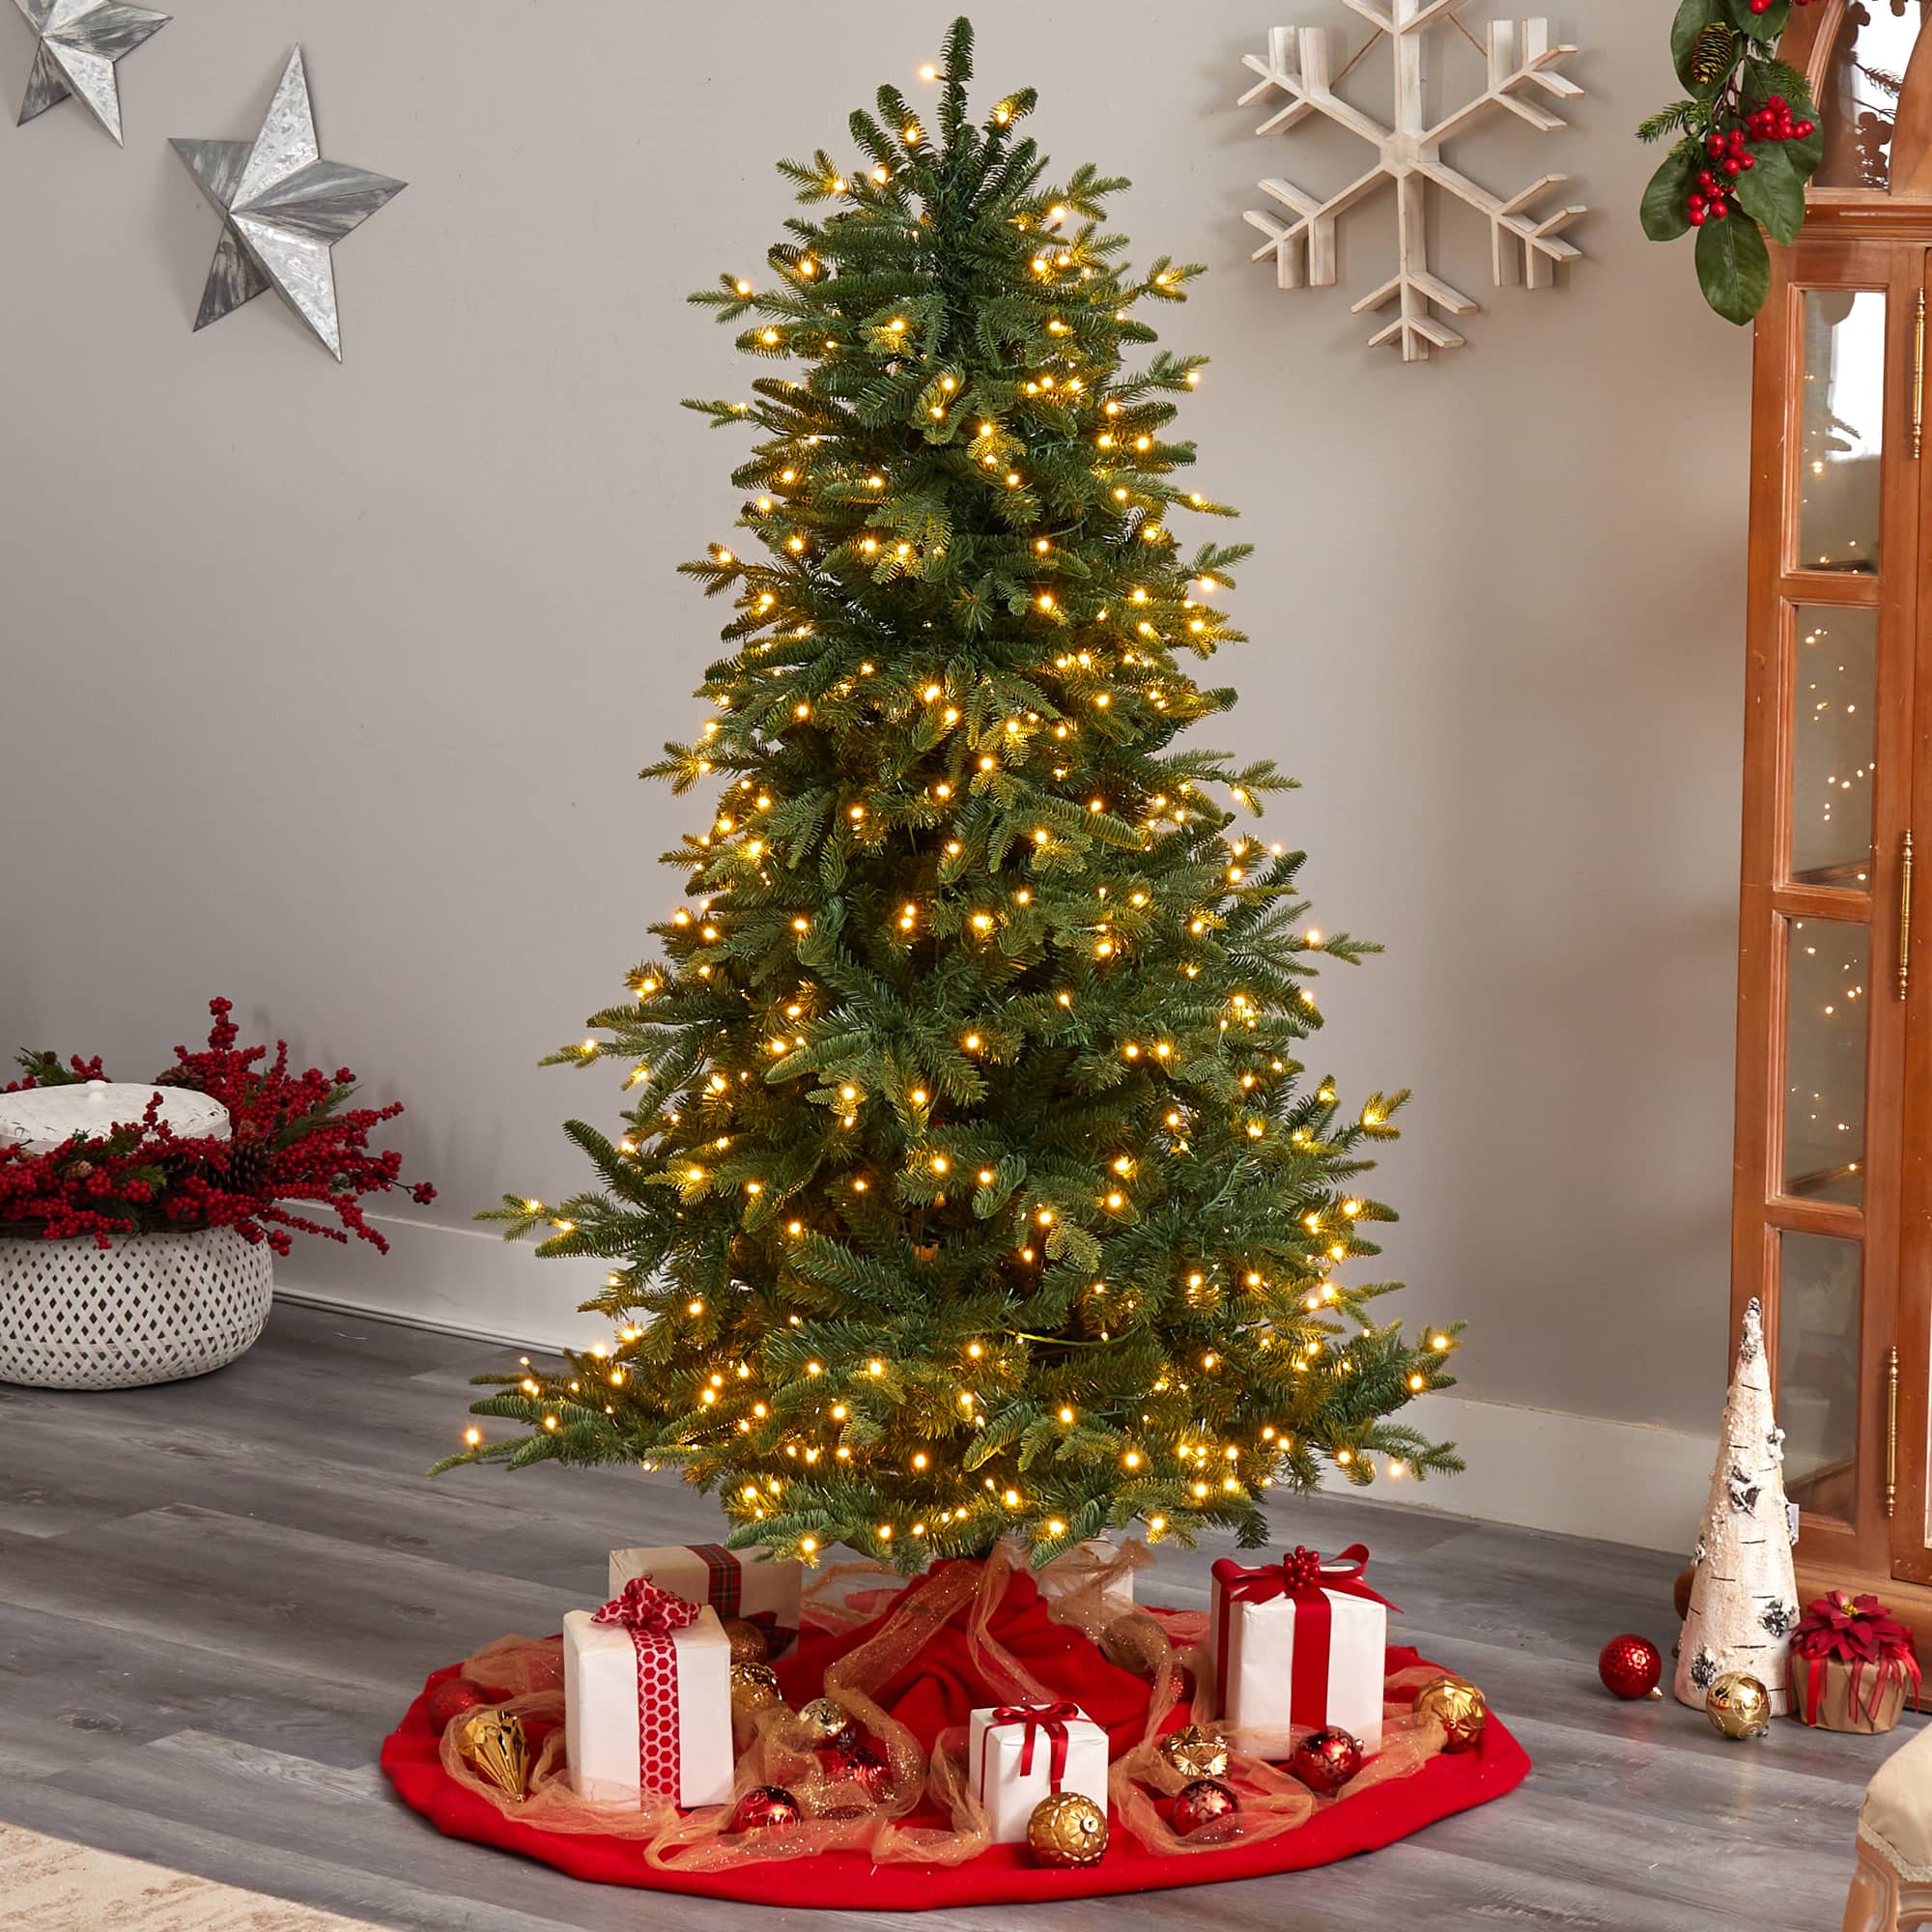 6ft. Pre-Lit Montreal Spruce Artificial Christmas Tree, White LED Lights